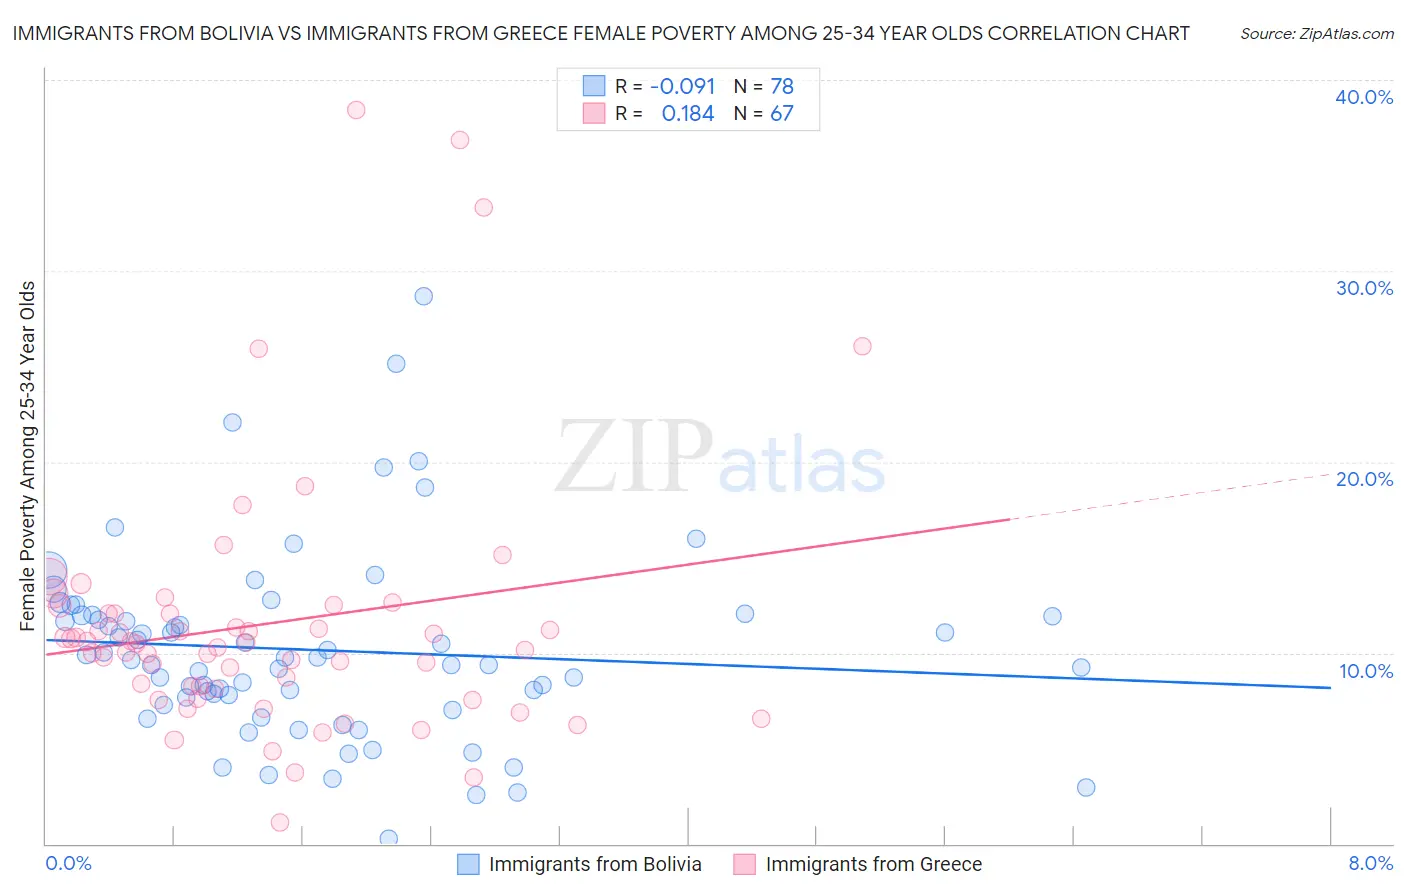 Immigrants from Bolivia vs Immigrants from Greece Female Poverty Among 25-34 Year Olds